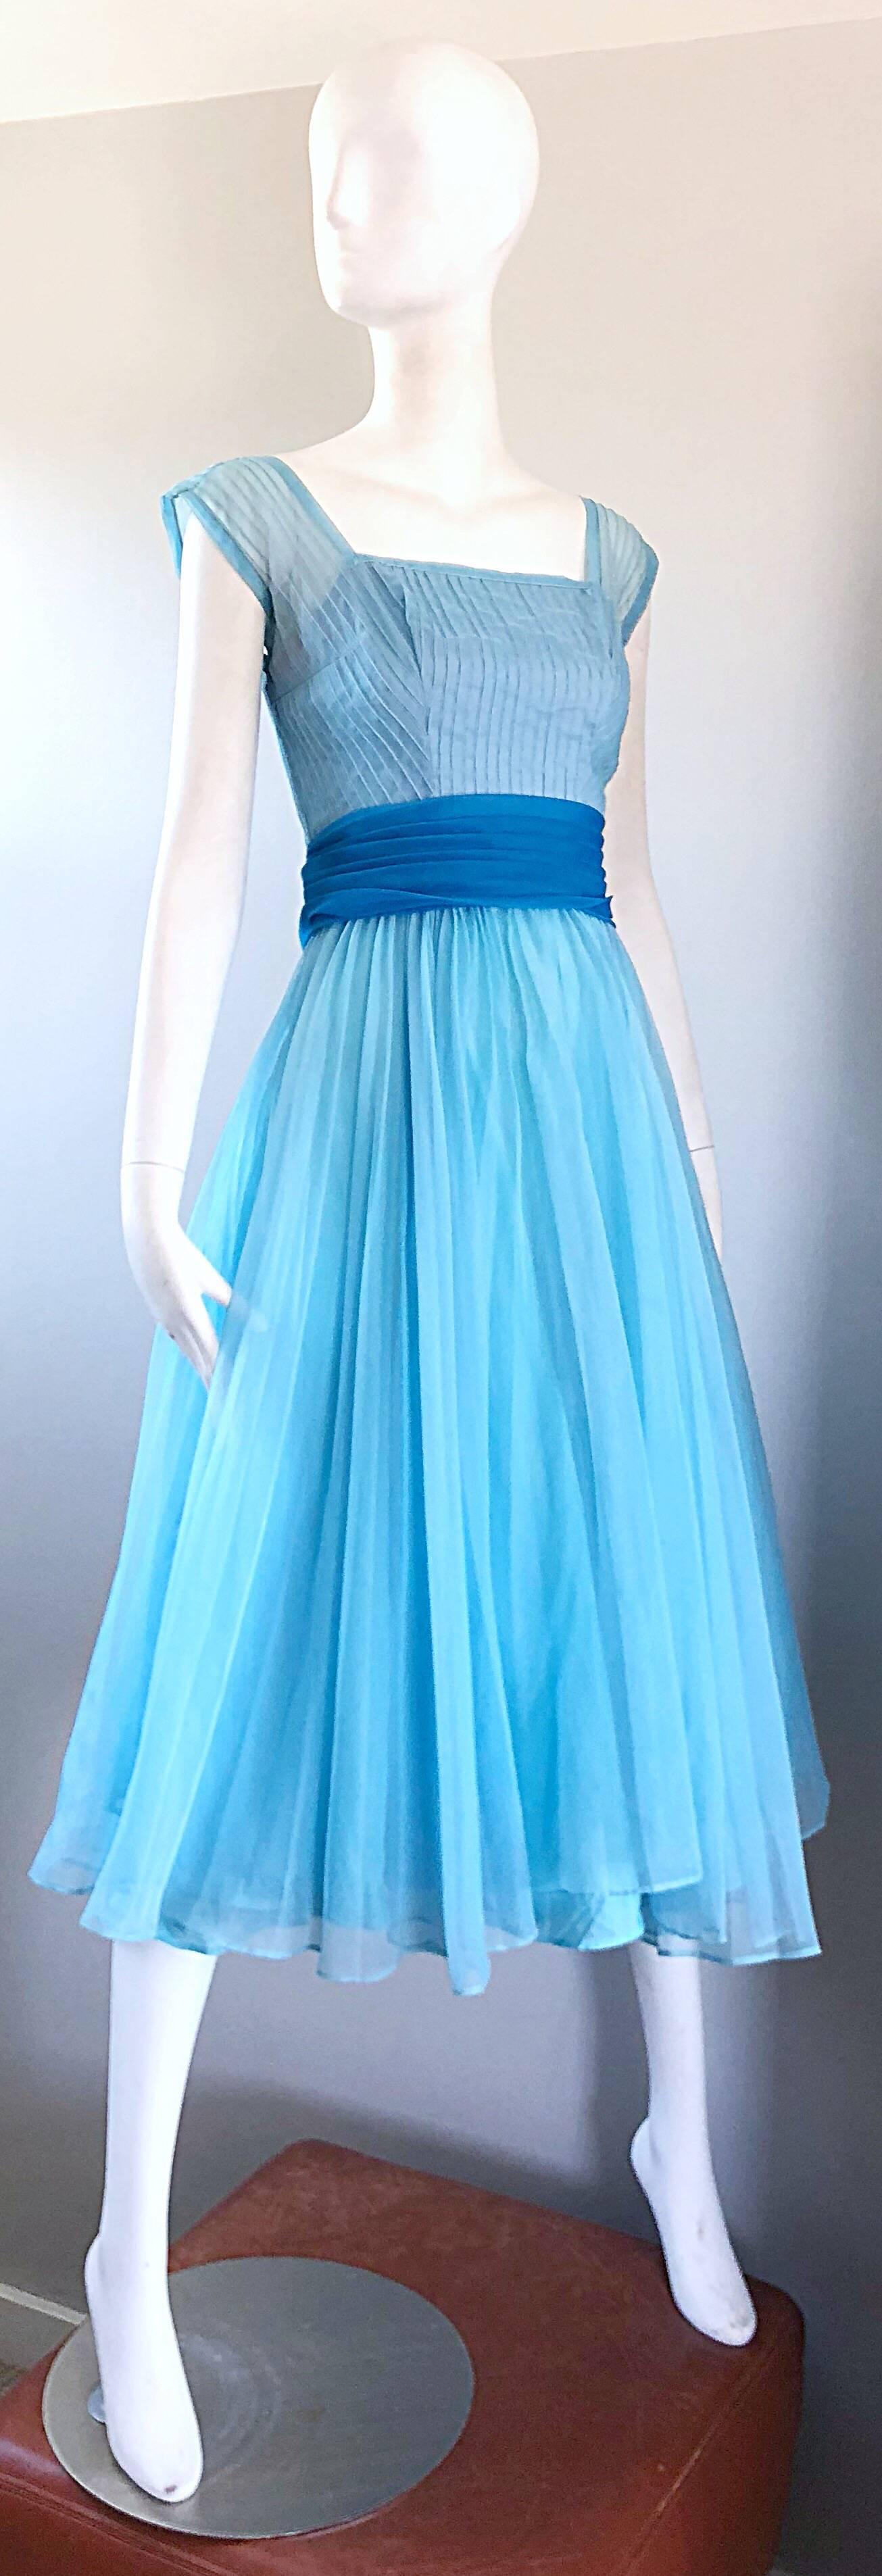 1950s Fred Perlberg Beautiful Robins Egg Blue Fit n' Flare Vintage 50s Dress For Sale 5